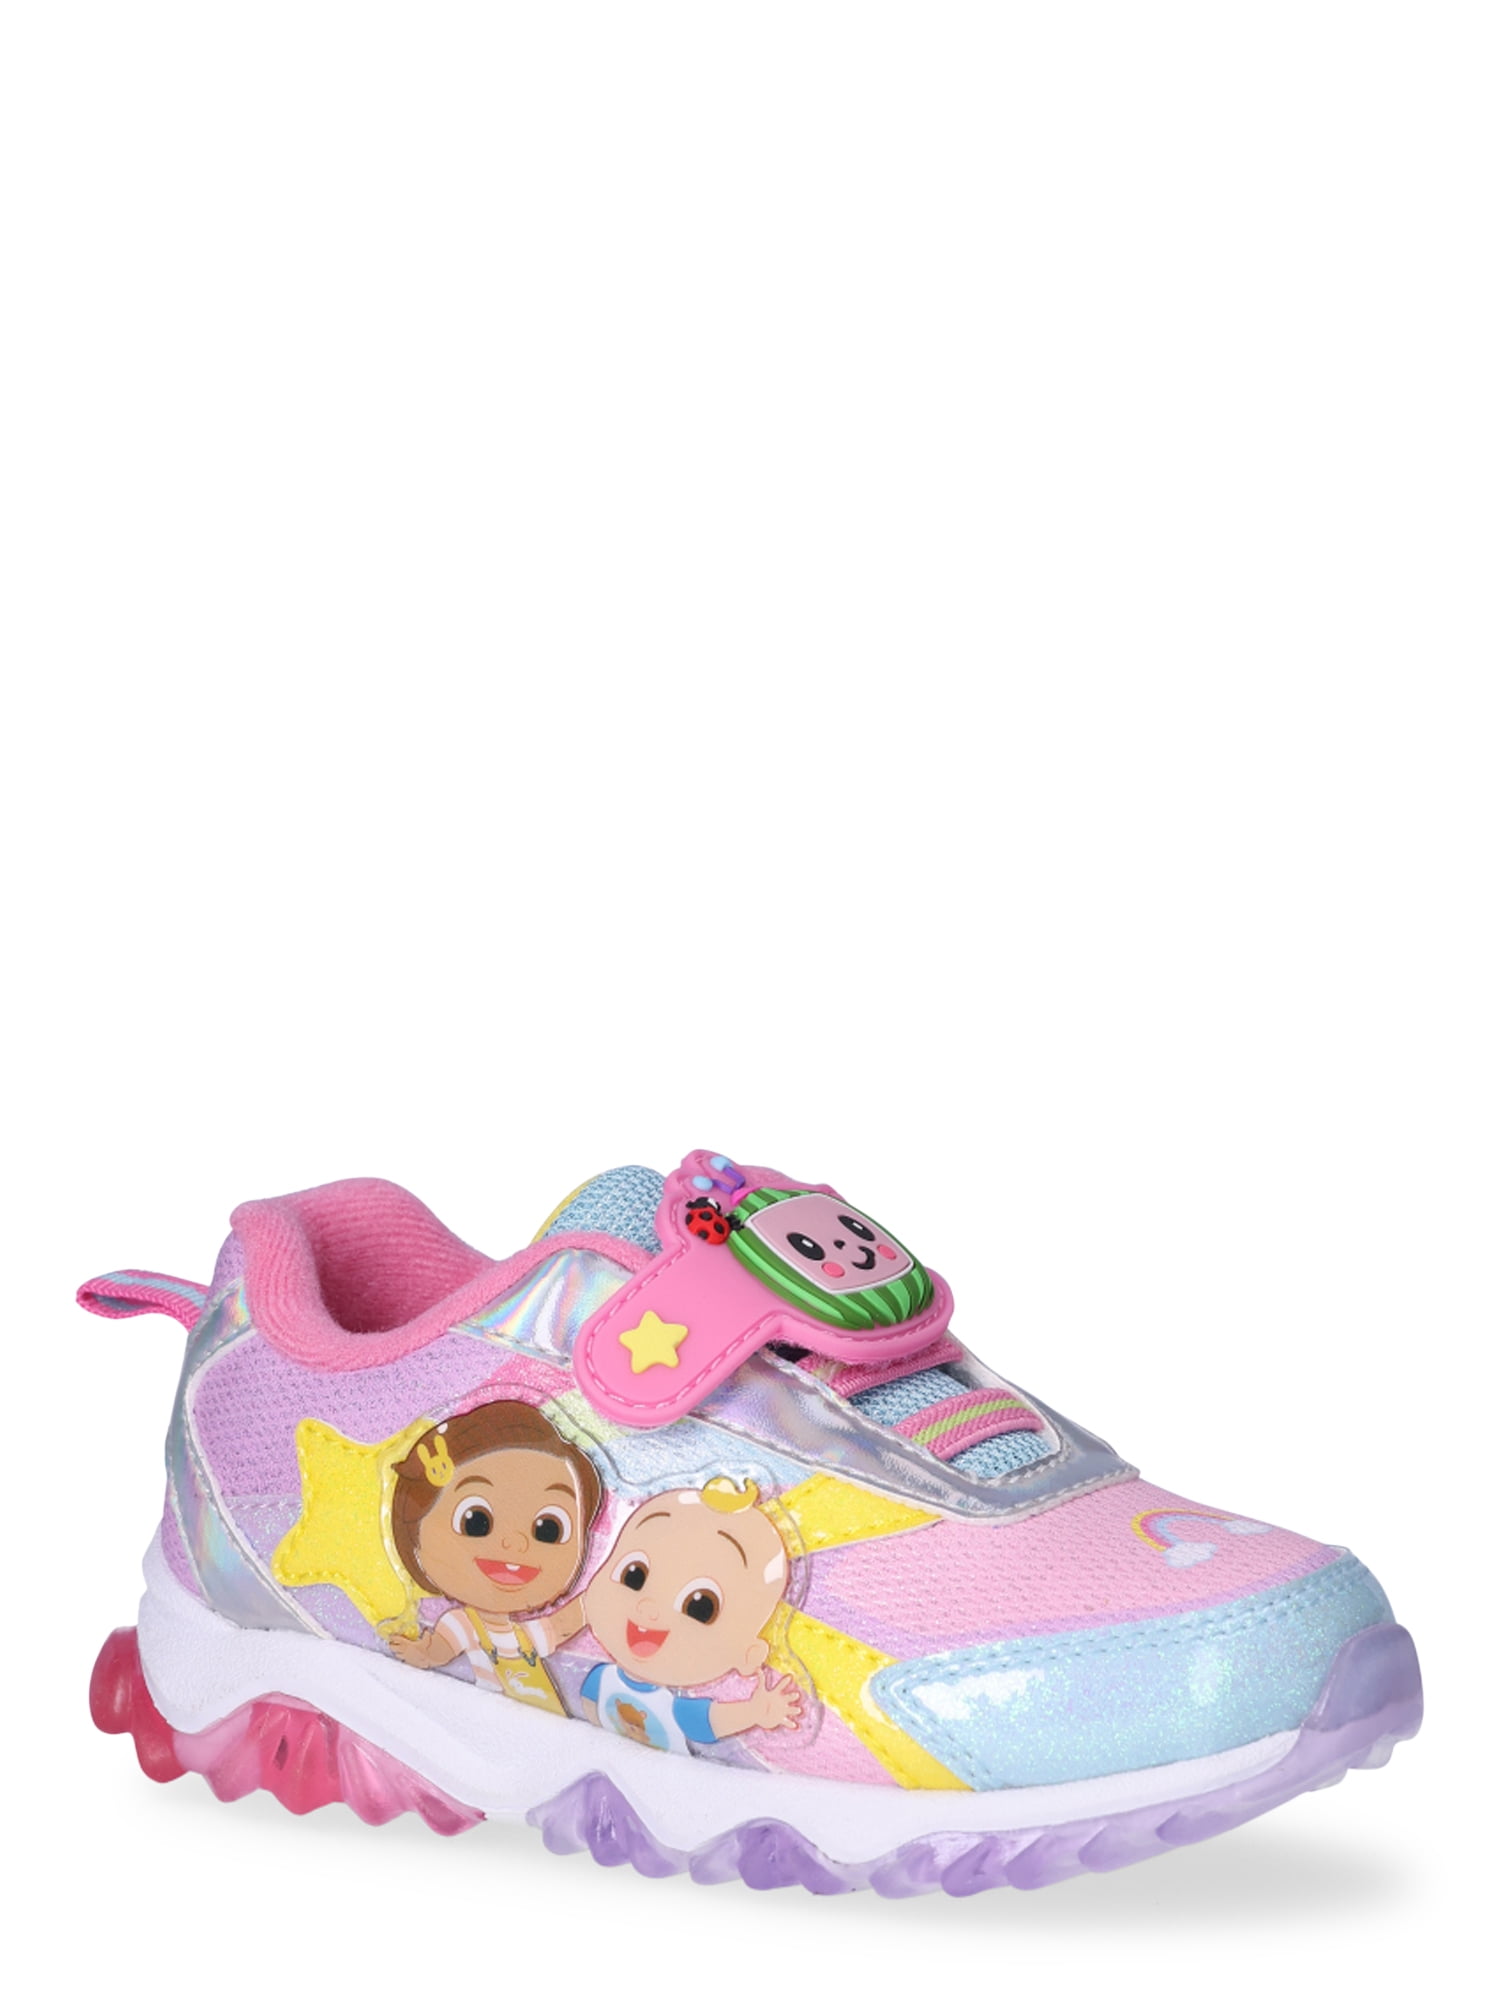 Cocomelon Toddler Girl Light Up Athletic Sneakers, Sizes 4-10 - Walmart.com